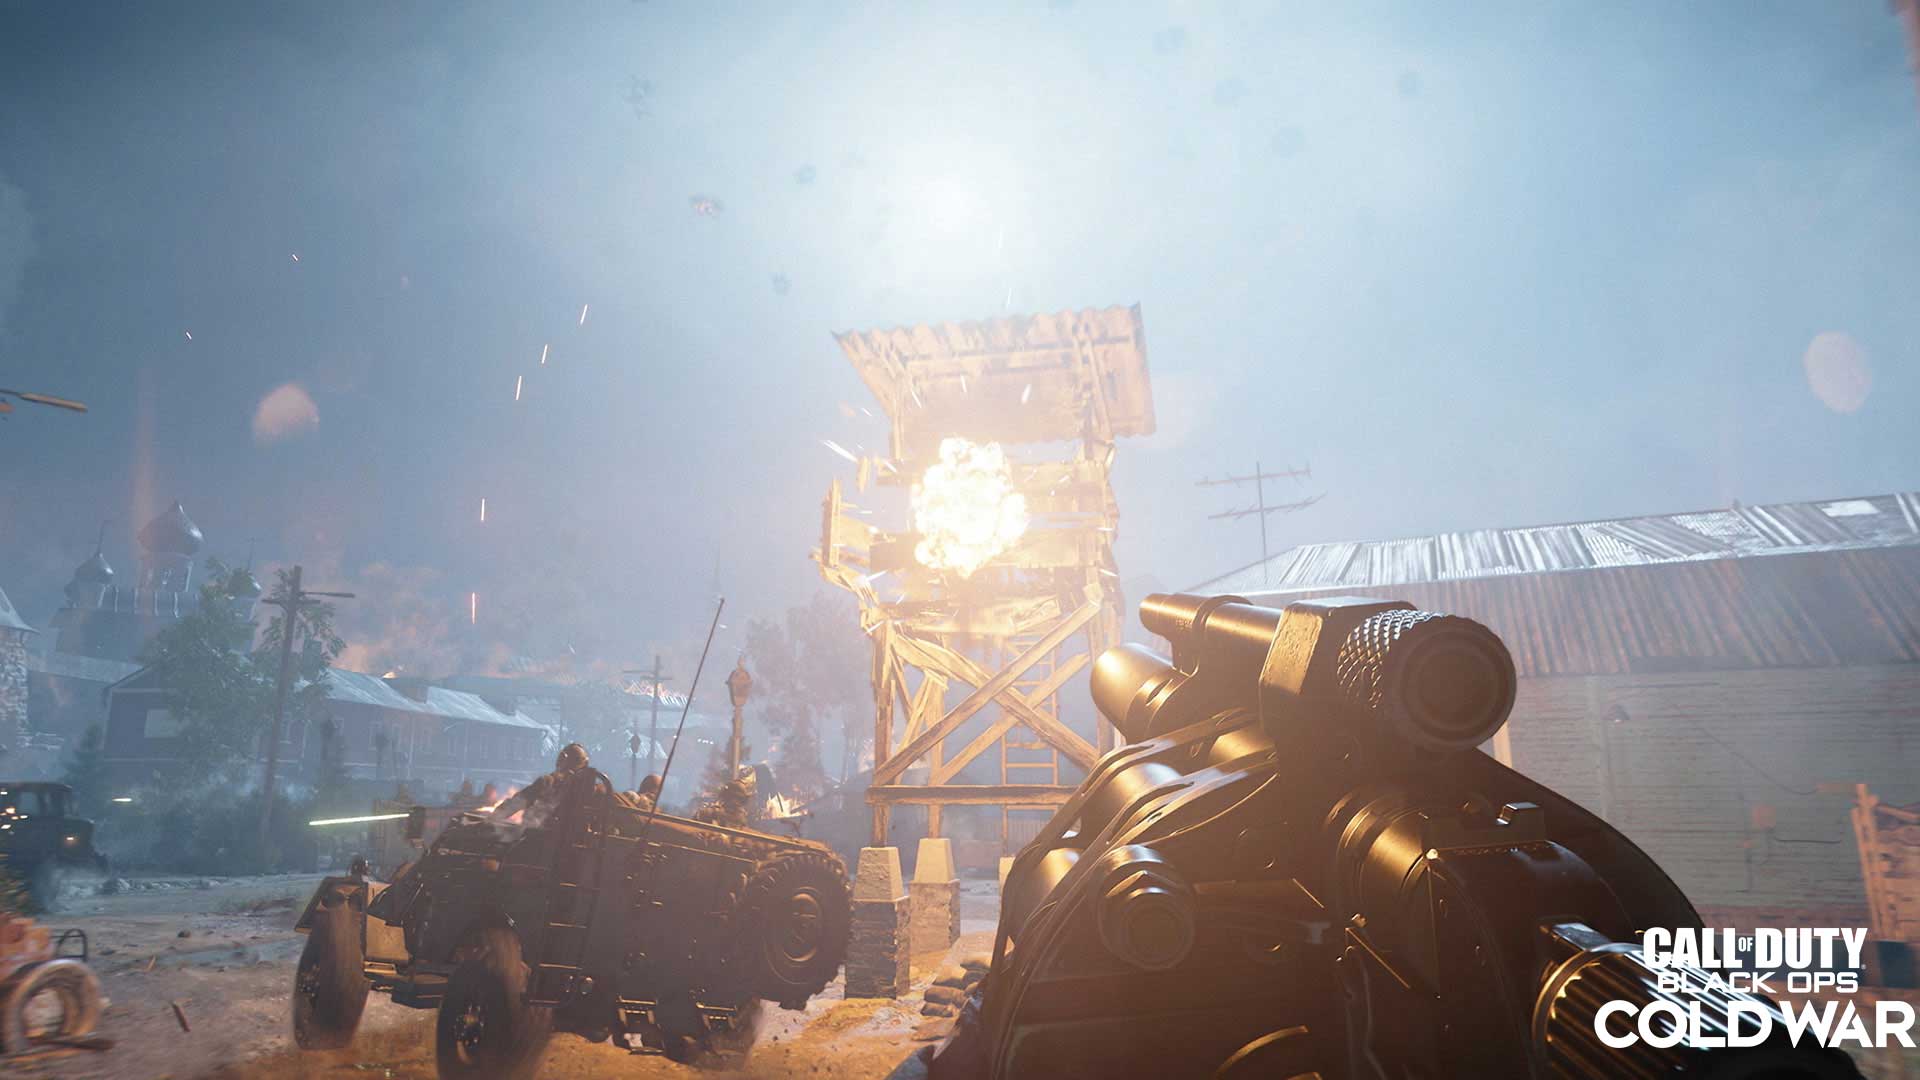 Call Of Duty: Black Ops Cold War Drops Specs And Launch Trailer For PC With New Requirements To Play!